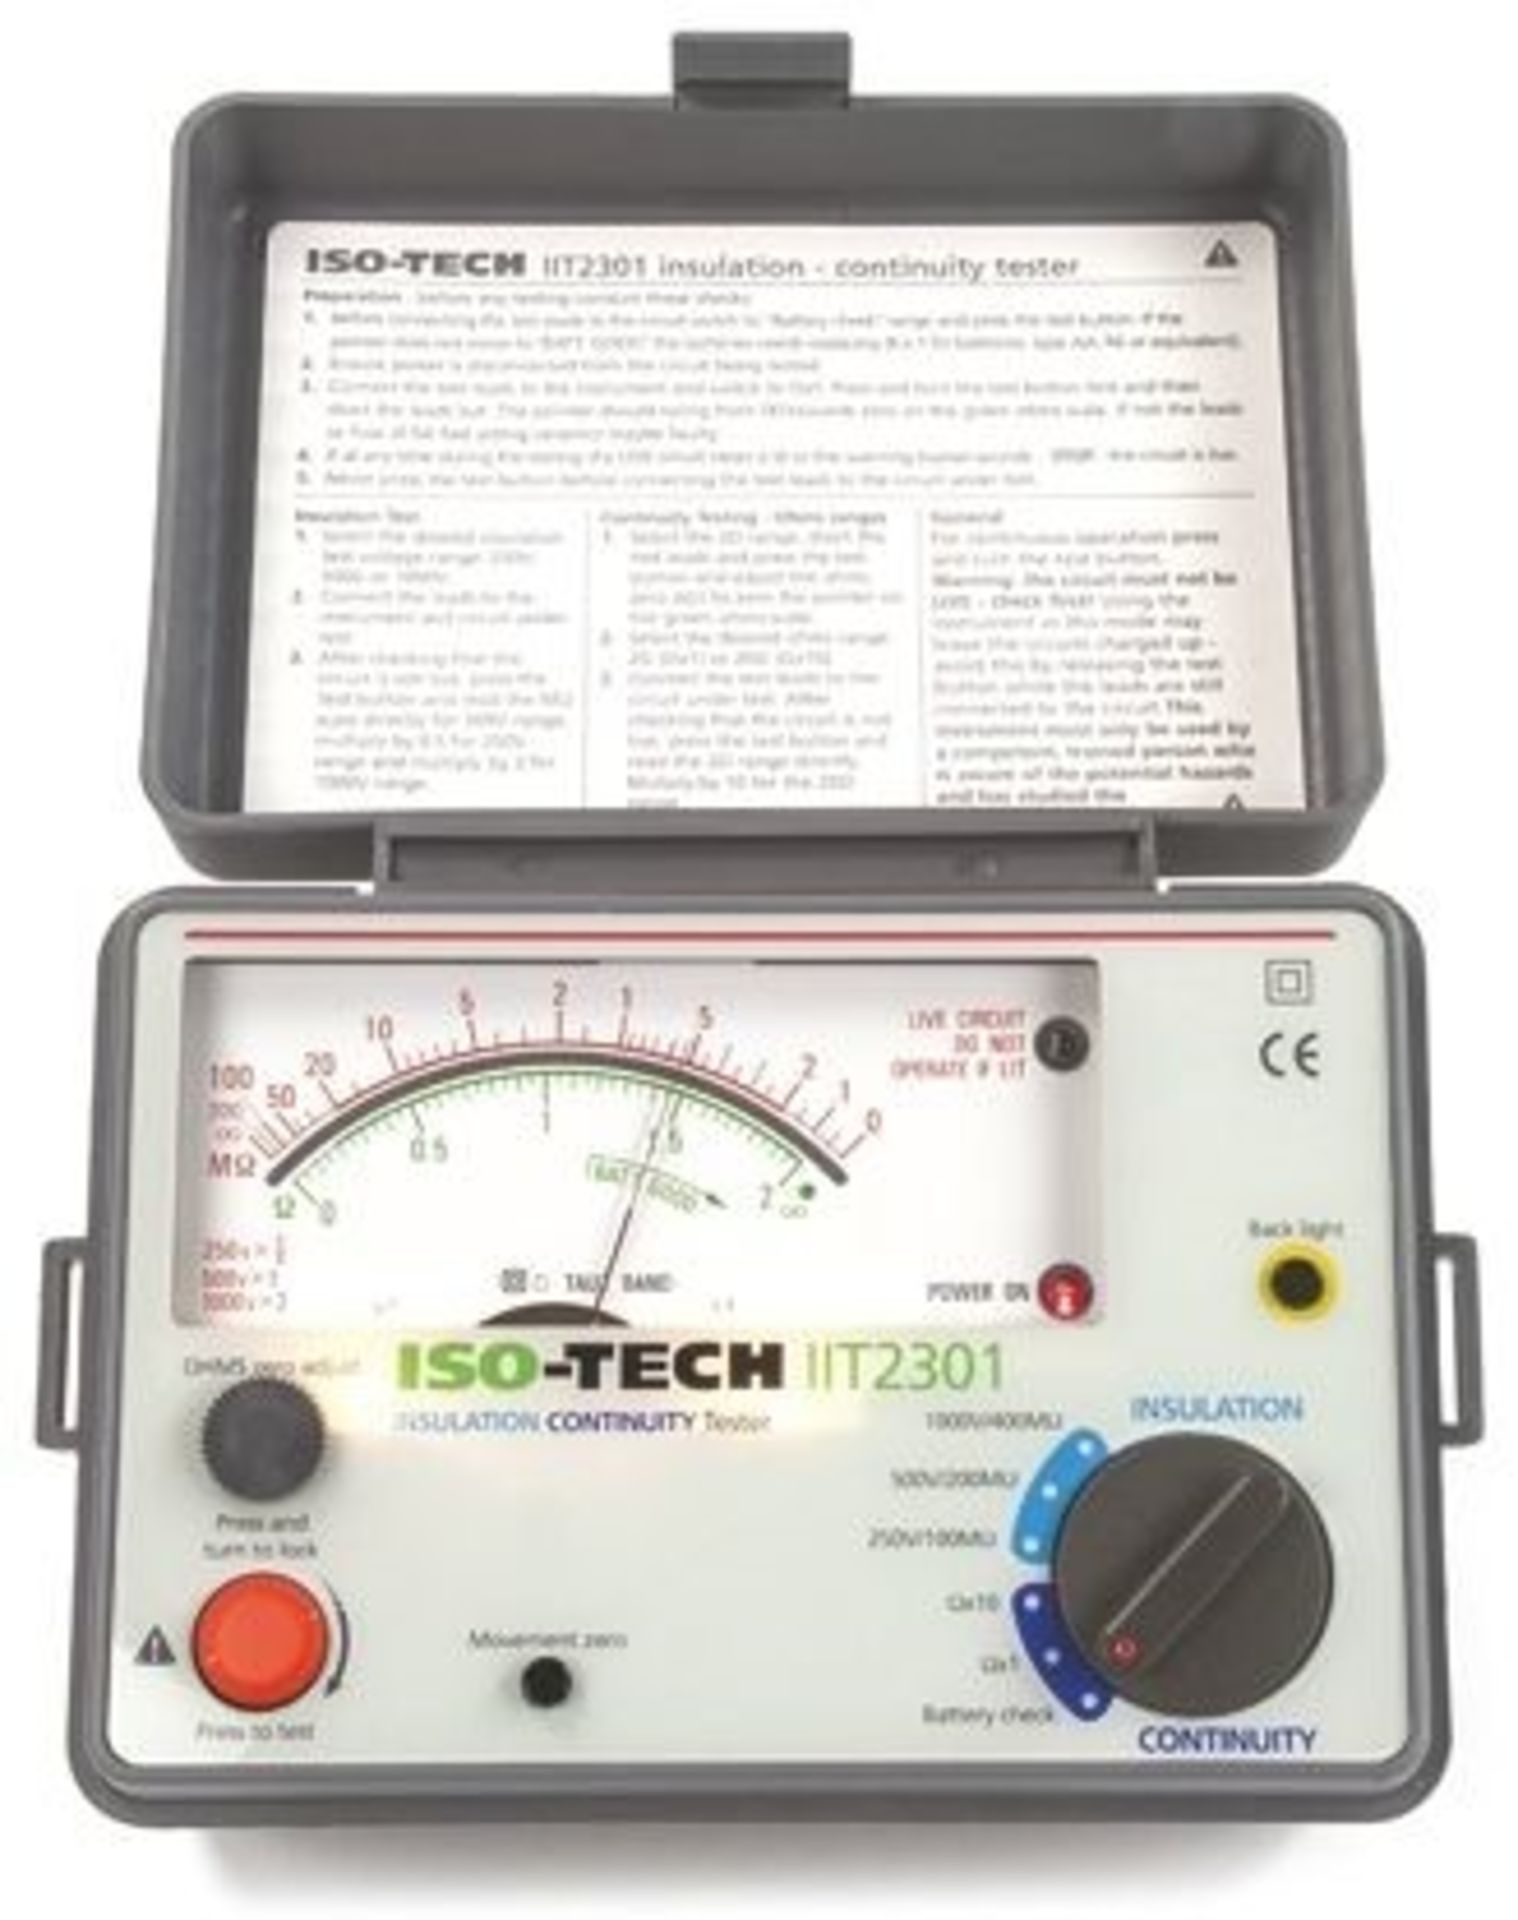 ISO-TECH IIT2301 Analogue Insulation / Continuity Tester 400MΩ CAT III 300V - Image 2 of 3